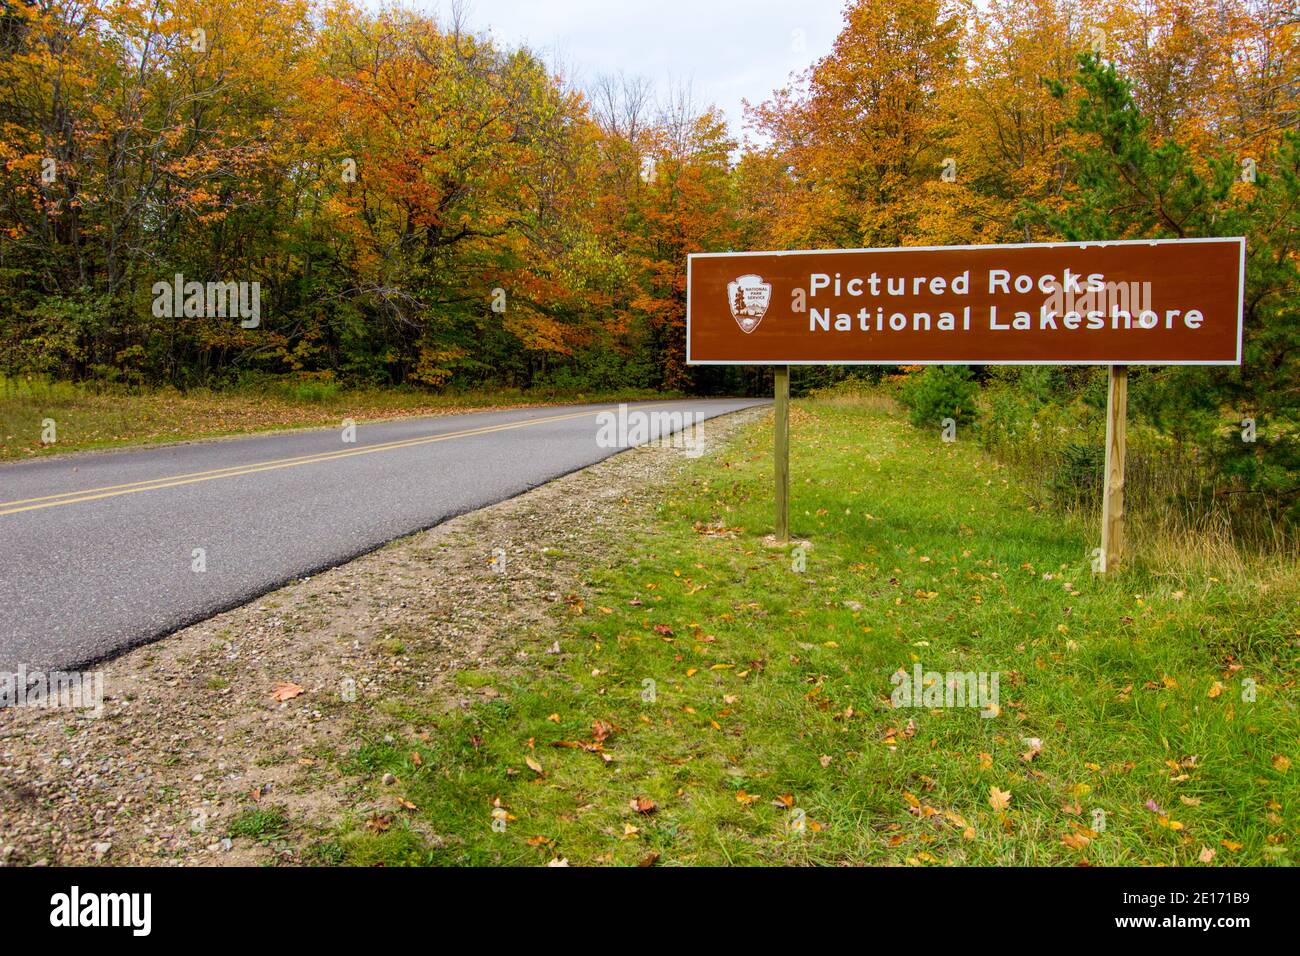 Munising, USA -Beautiful vibrant lush fall foliage surround the entrance sign to Pictured Rocks National Lakeshore in the Upper Peninsula of Michigan. Stock Photo